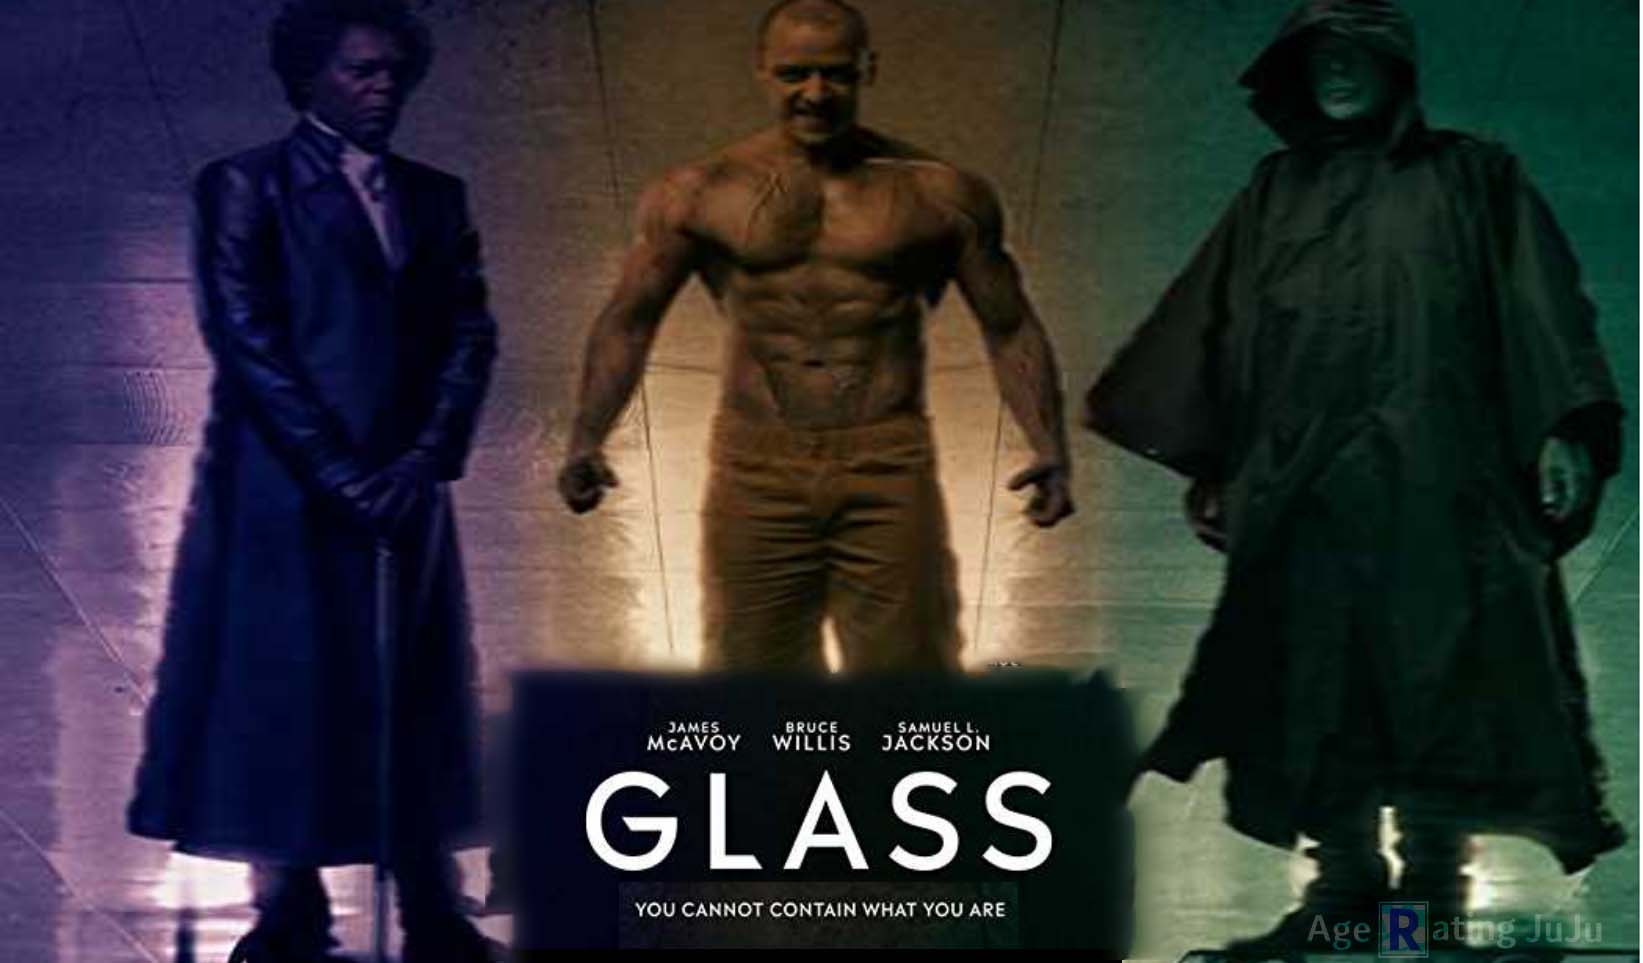 Glass Age Rating 2019 - Movie Poster Images and Wallpapers